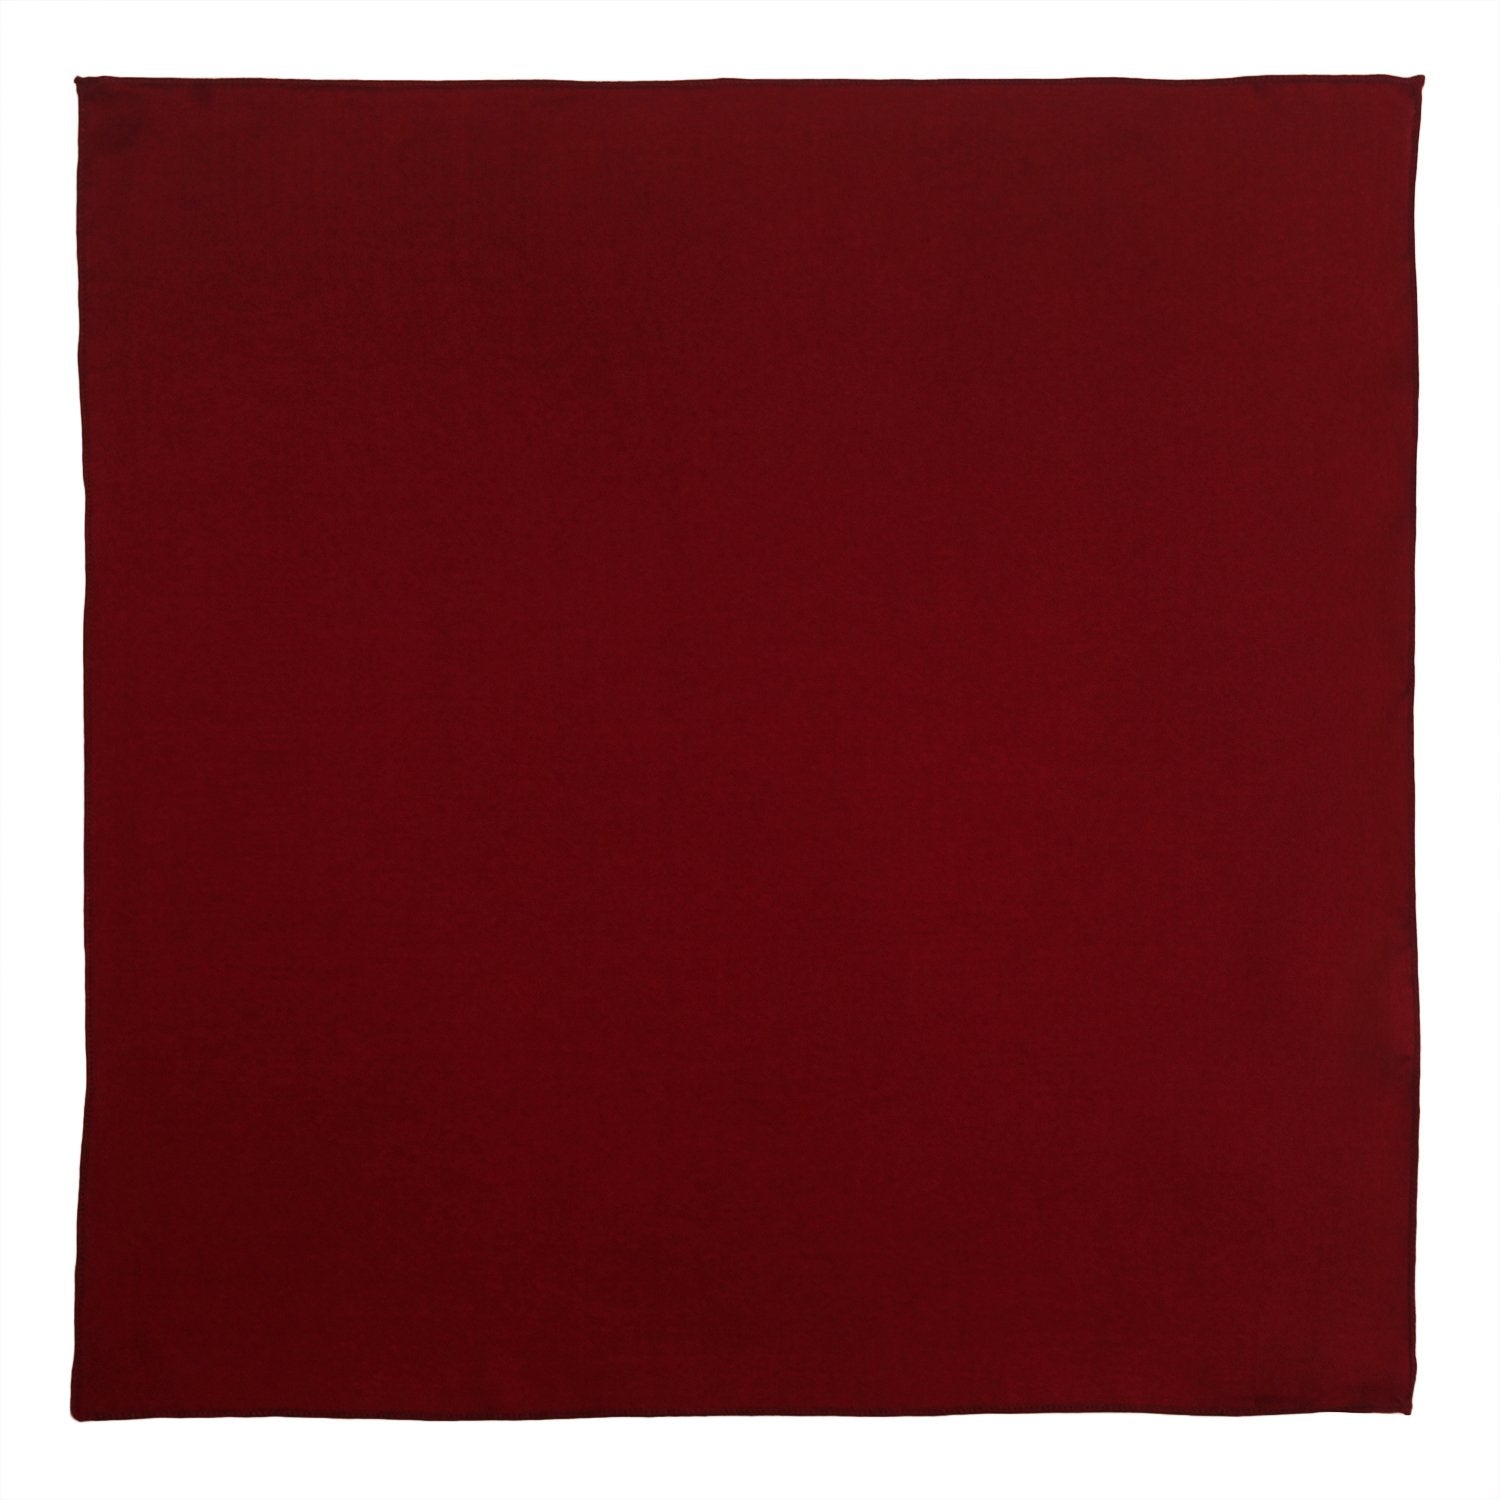 Chokore Burgundy / Maroon Colour Pure Silk Pocket Square, from the Solids Line